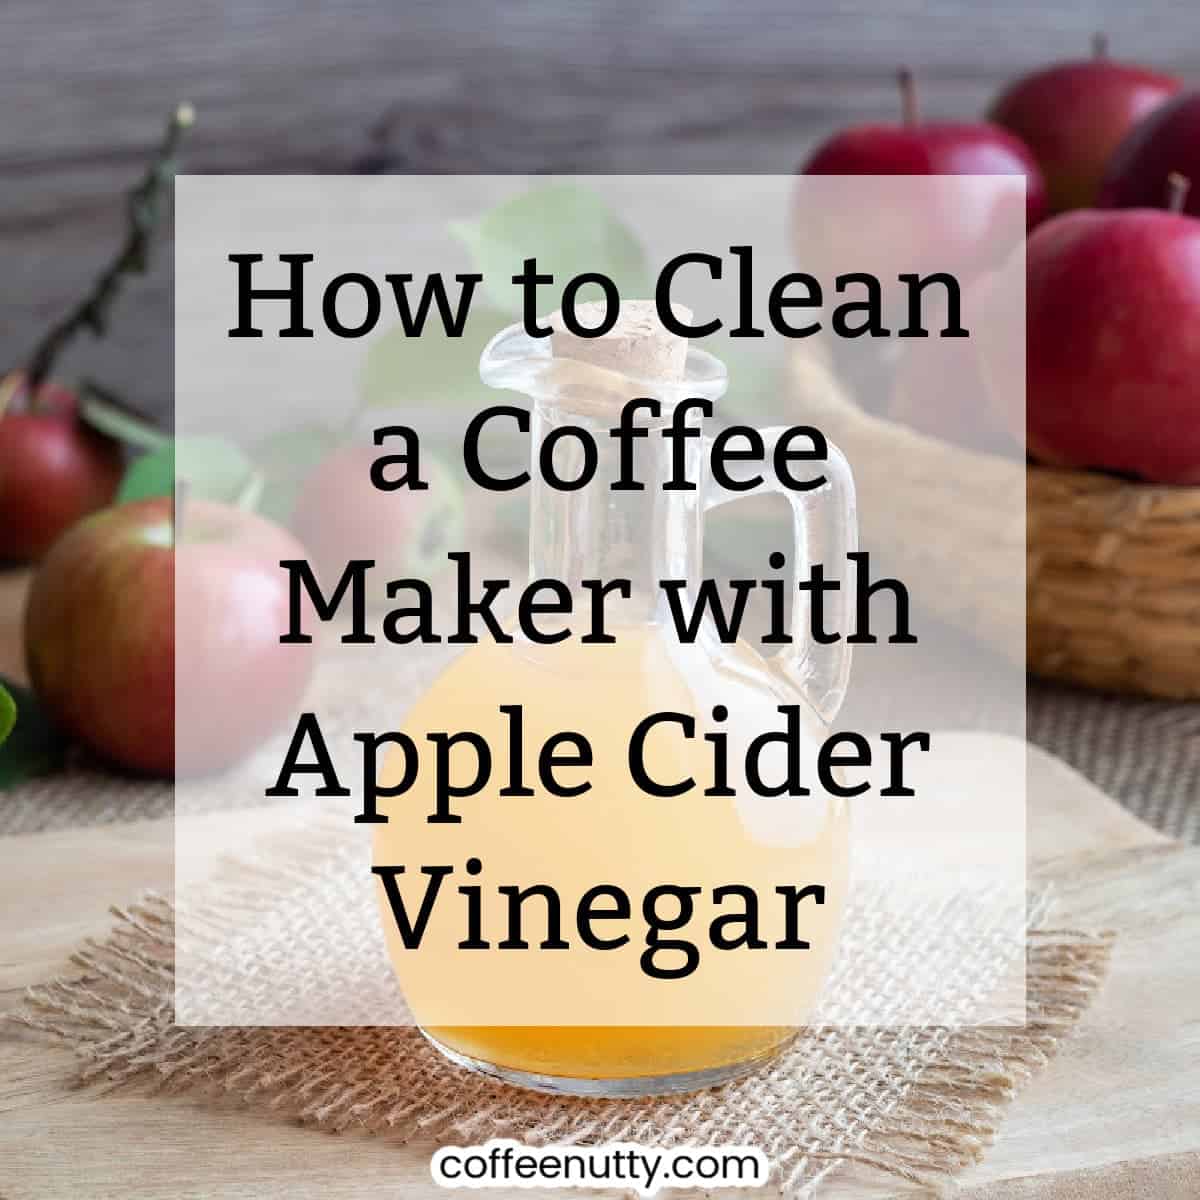 Apple cider vinegar on wood table with text overlay reading "how to clean a coffee maker with apple cider vinegar".